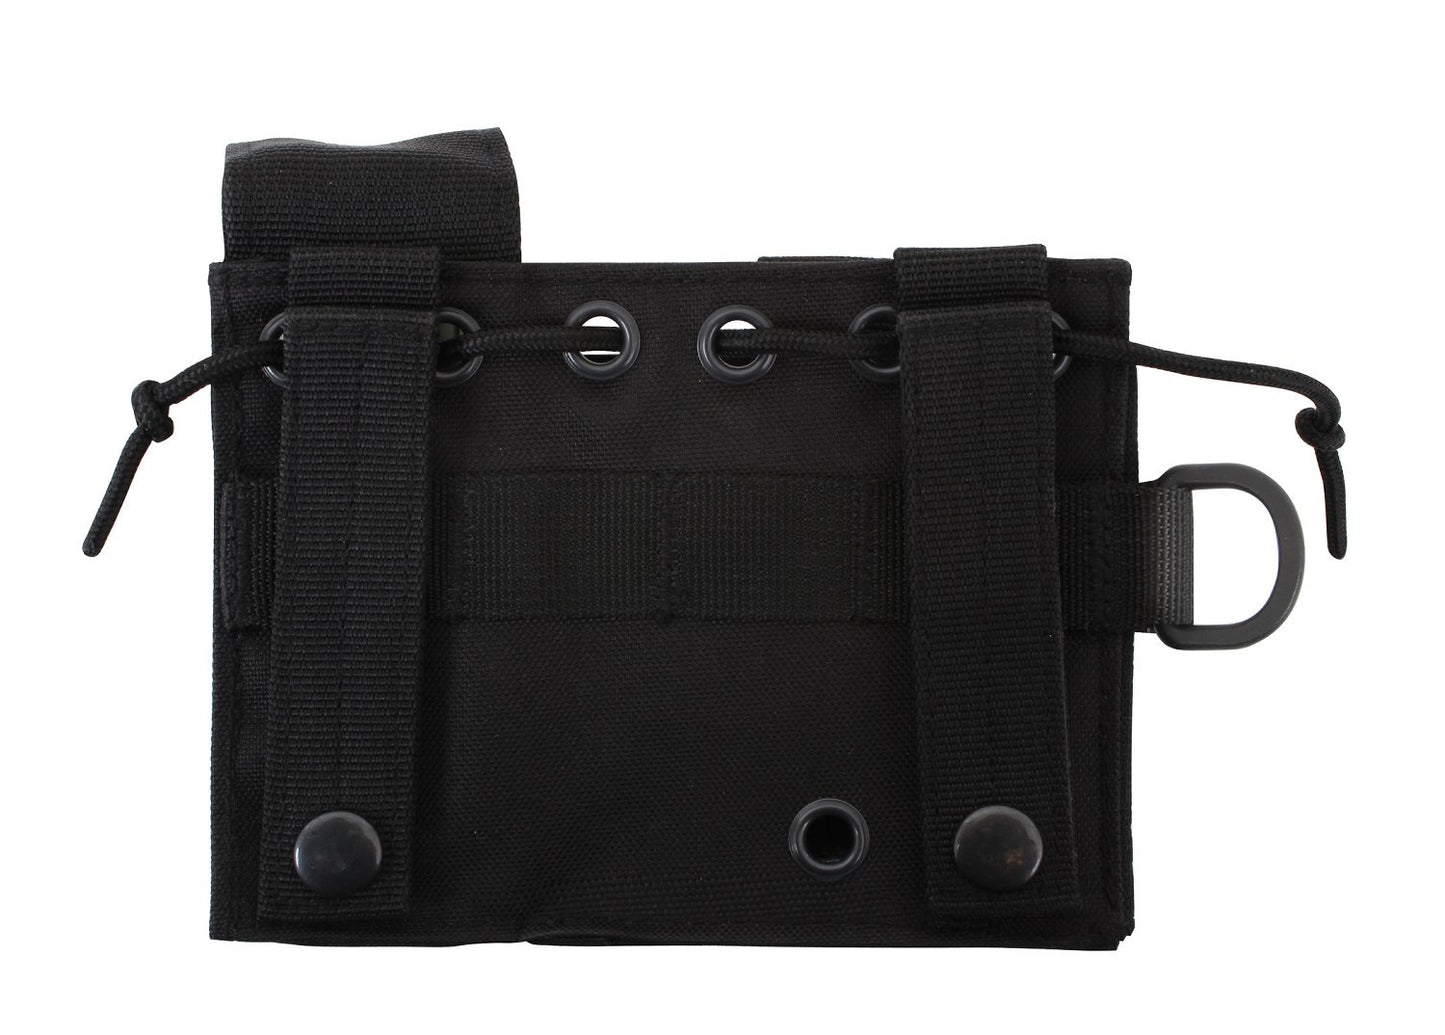 Administrative Pouch - Molle w/ Cell Pouches - Black or Brown